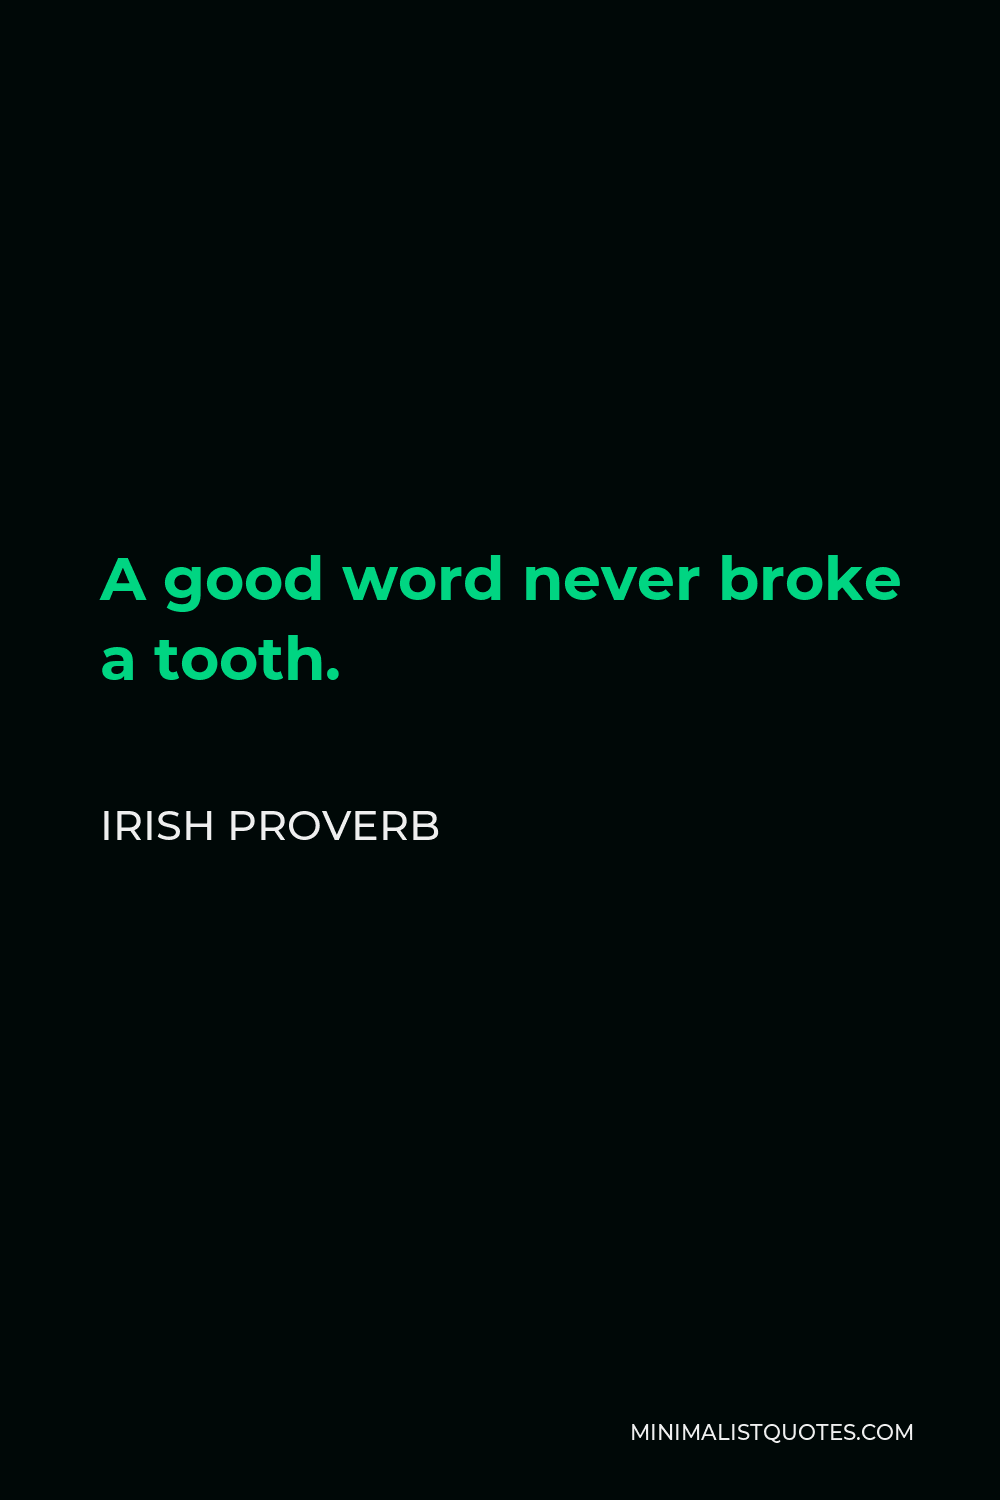 Irish Proverb Quote - A good word never broke a tooth.